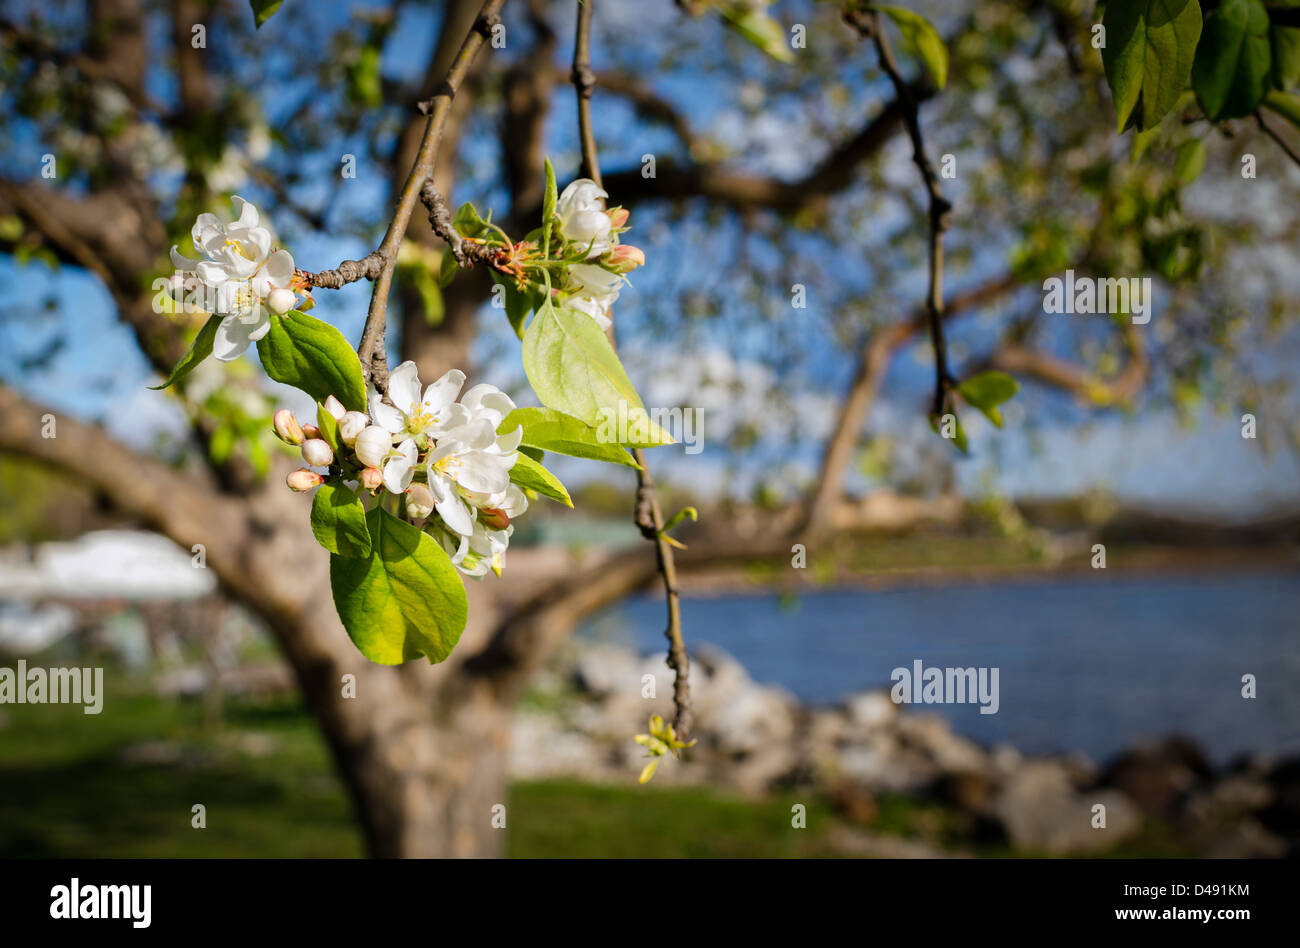 Apple blossoms in bloom on a wild apple tree Malus pumila by Hudson River. Clusters of white flowers and pink buds, Stock Photo